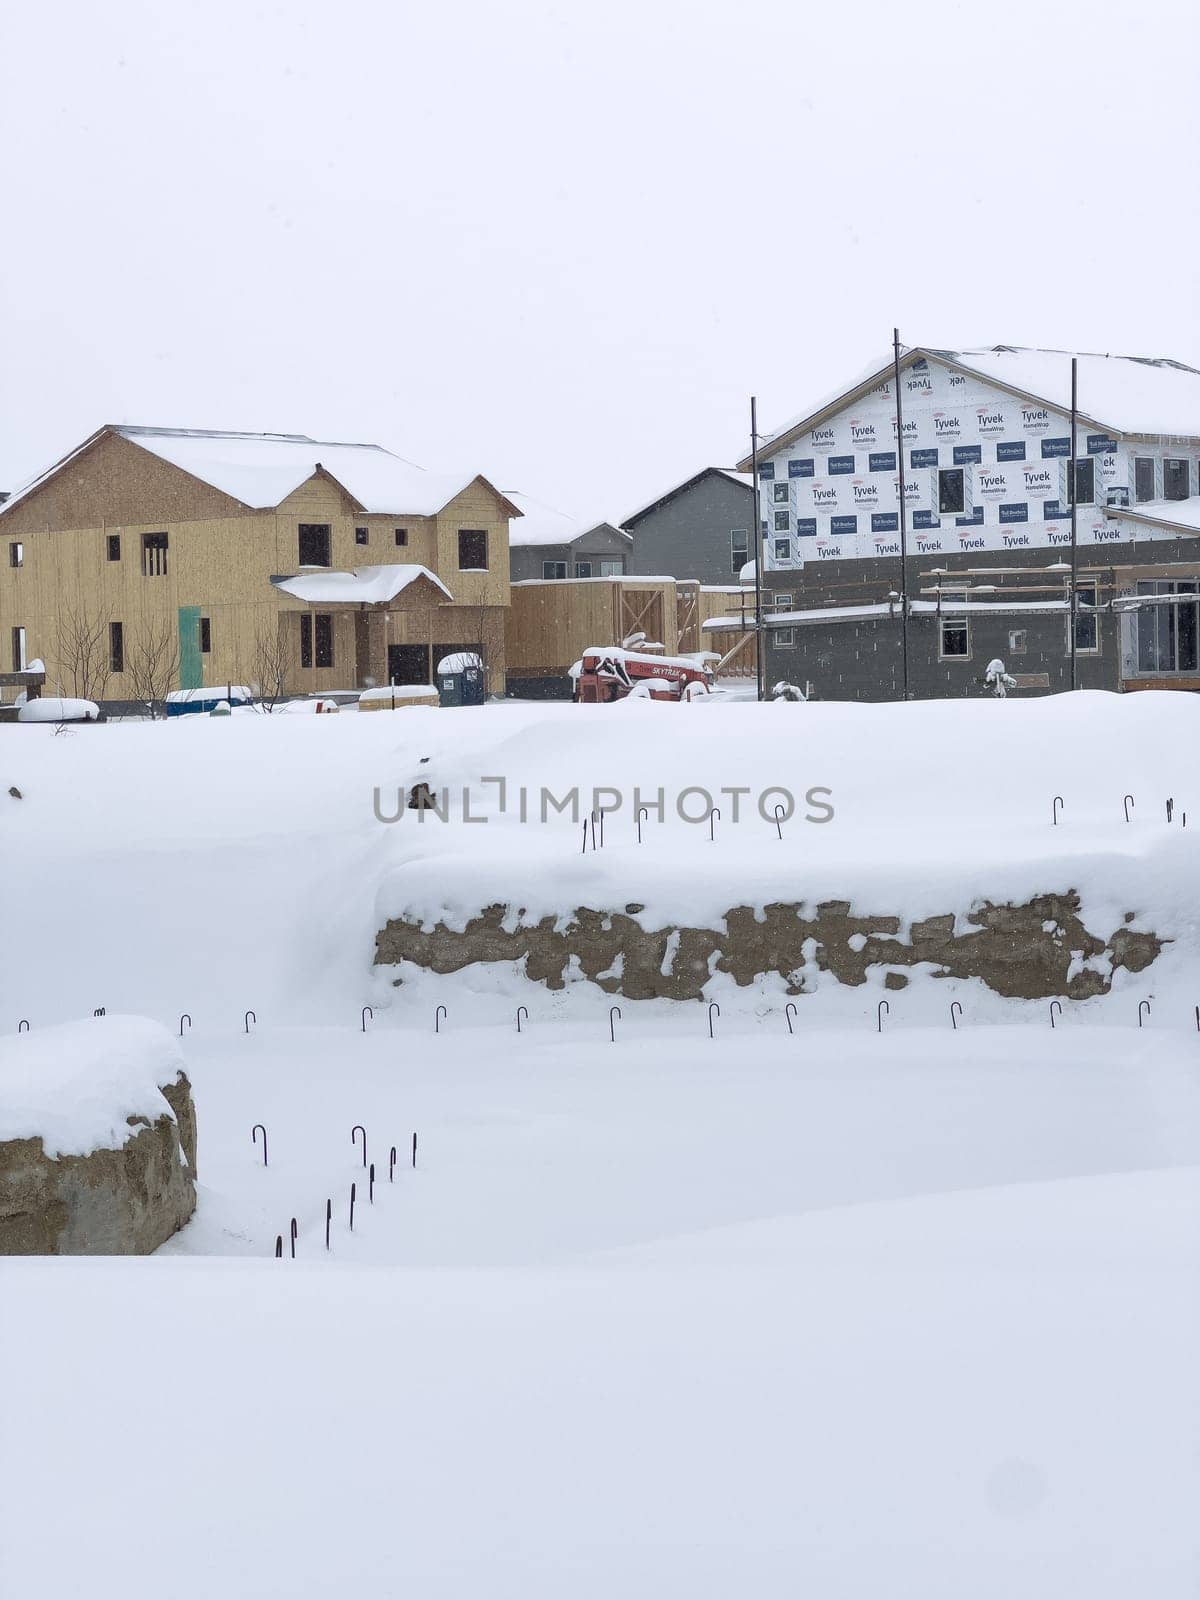 Castle Rock, Colorado, USA-March 16, 2024-Fresh snowfall gently covers a new suburban neighborhood under construction, where the emerging structures await completion, nestled in a wintery setting.